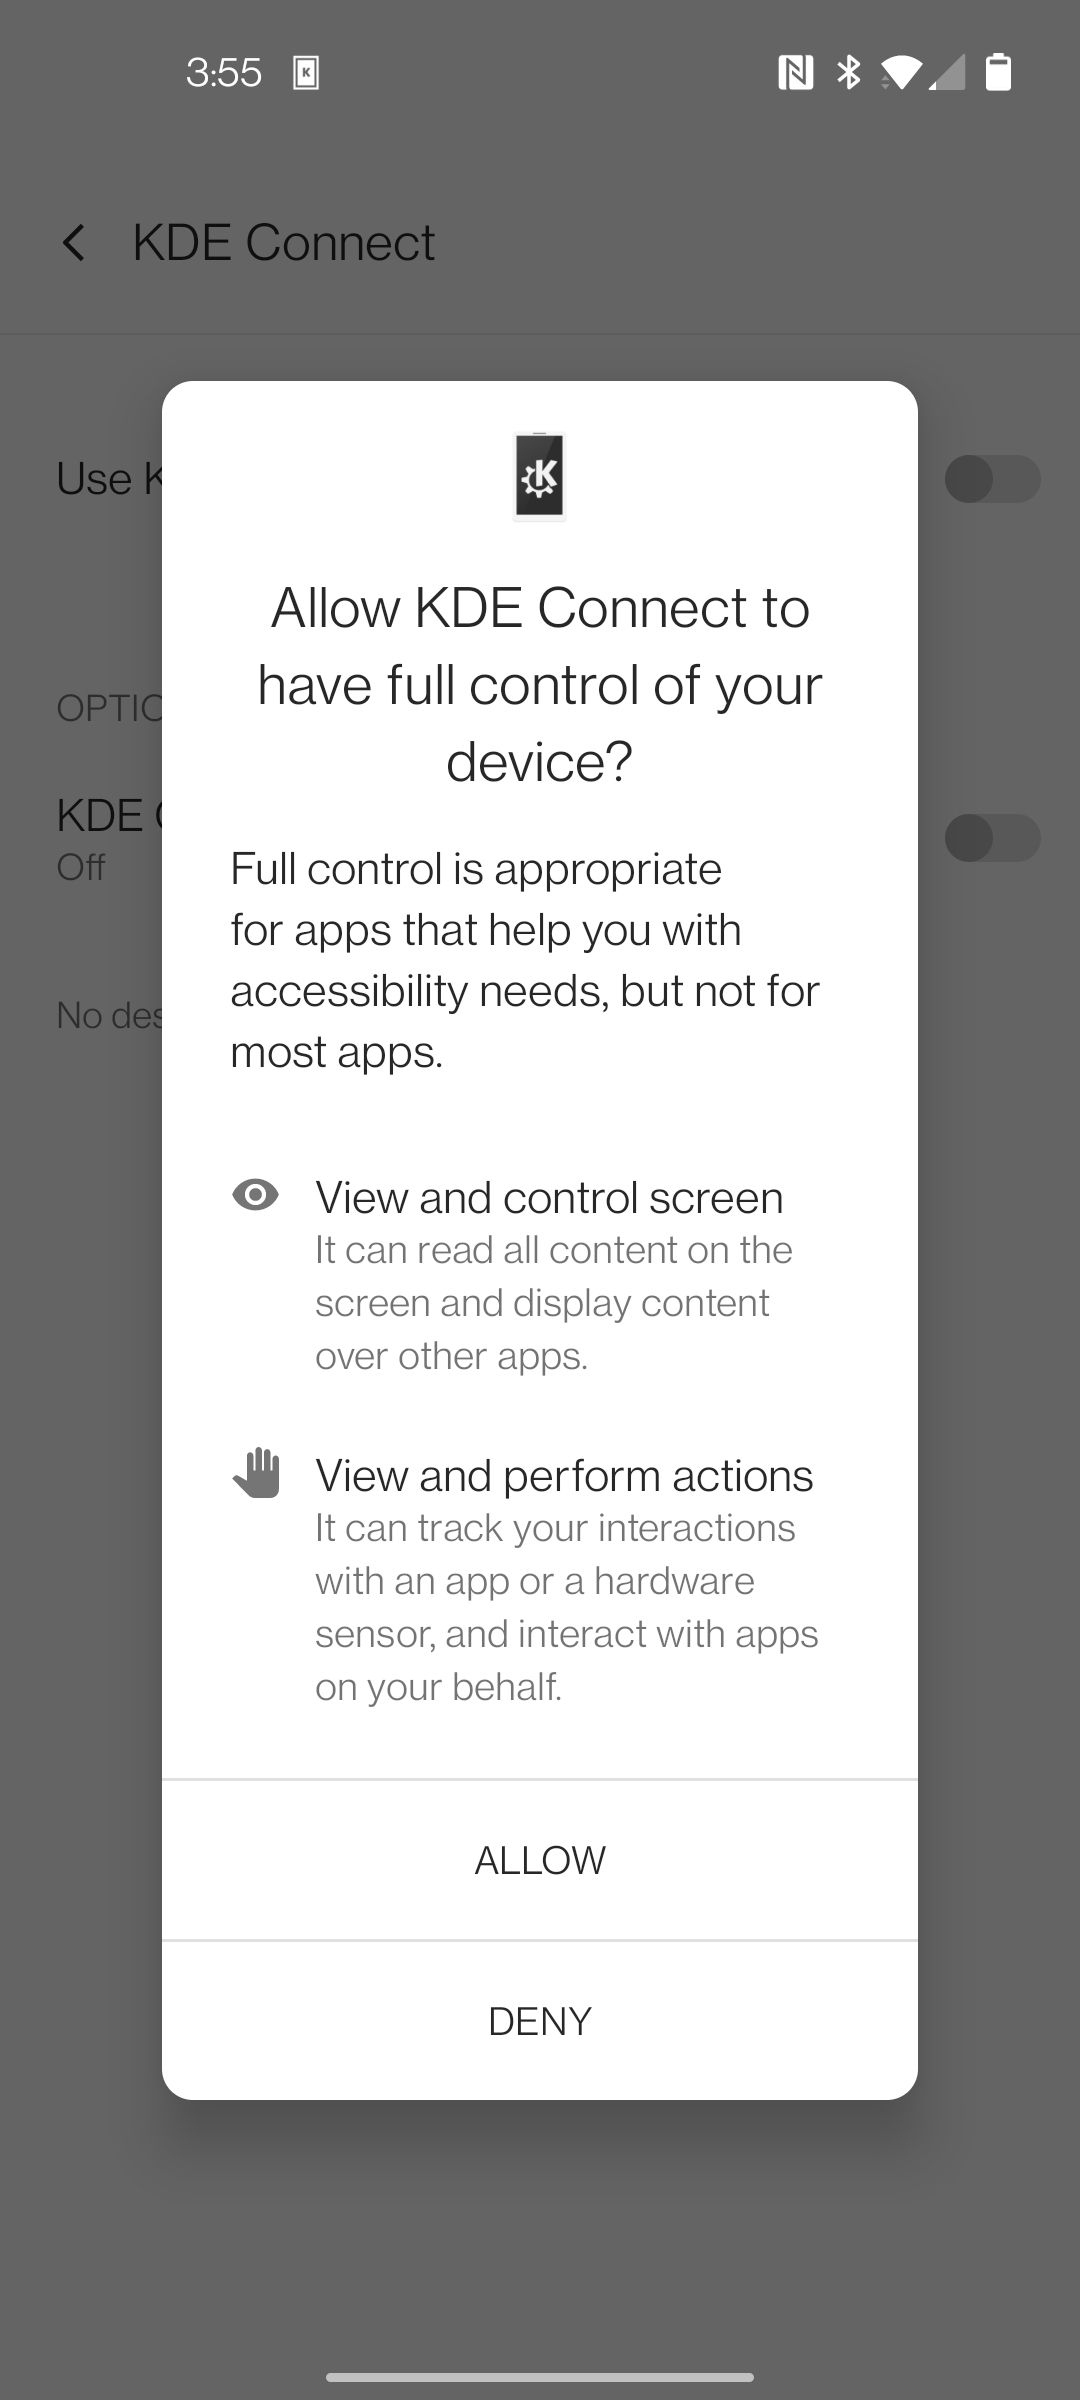 Android screenshot with window for allowing or denying full control